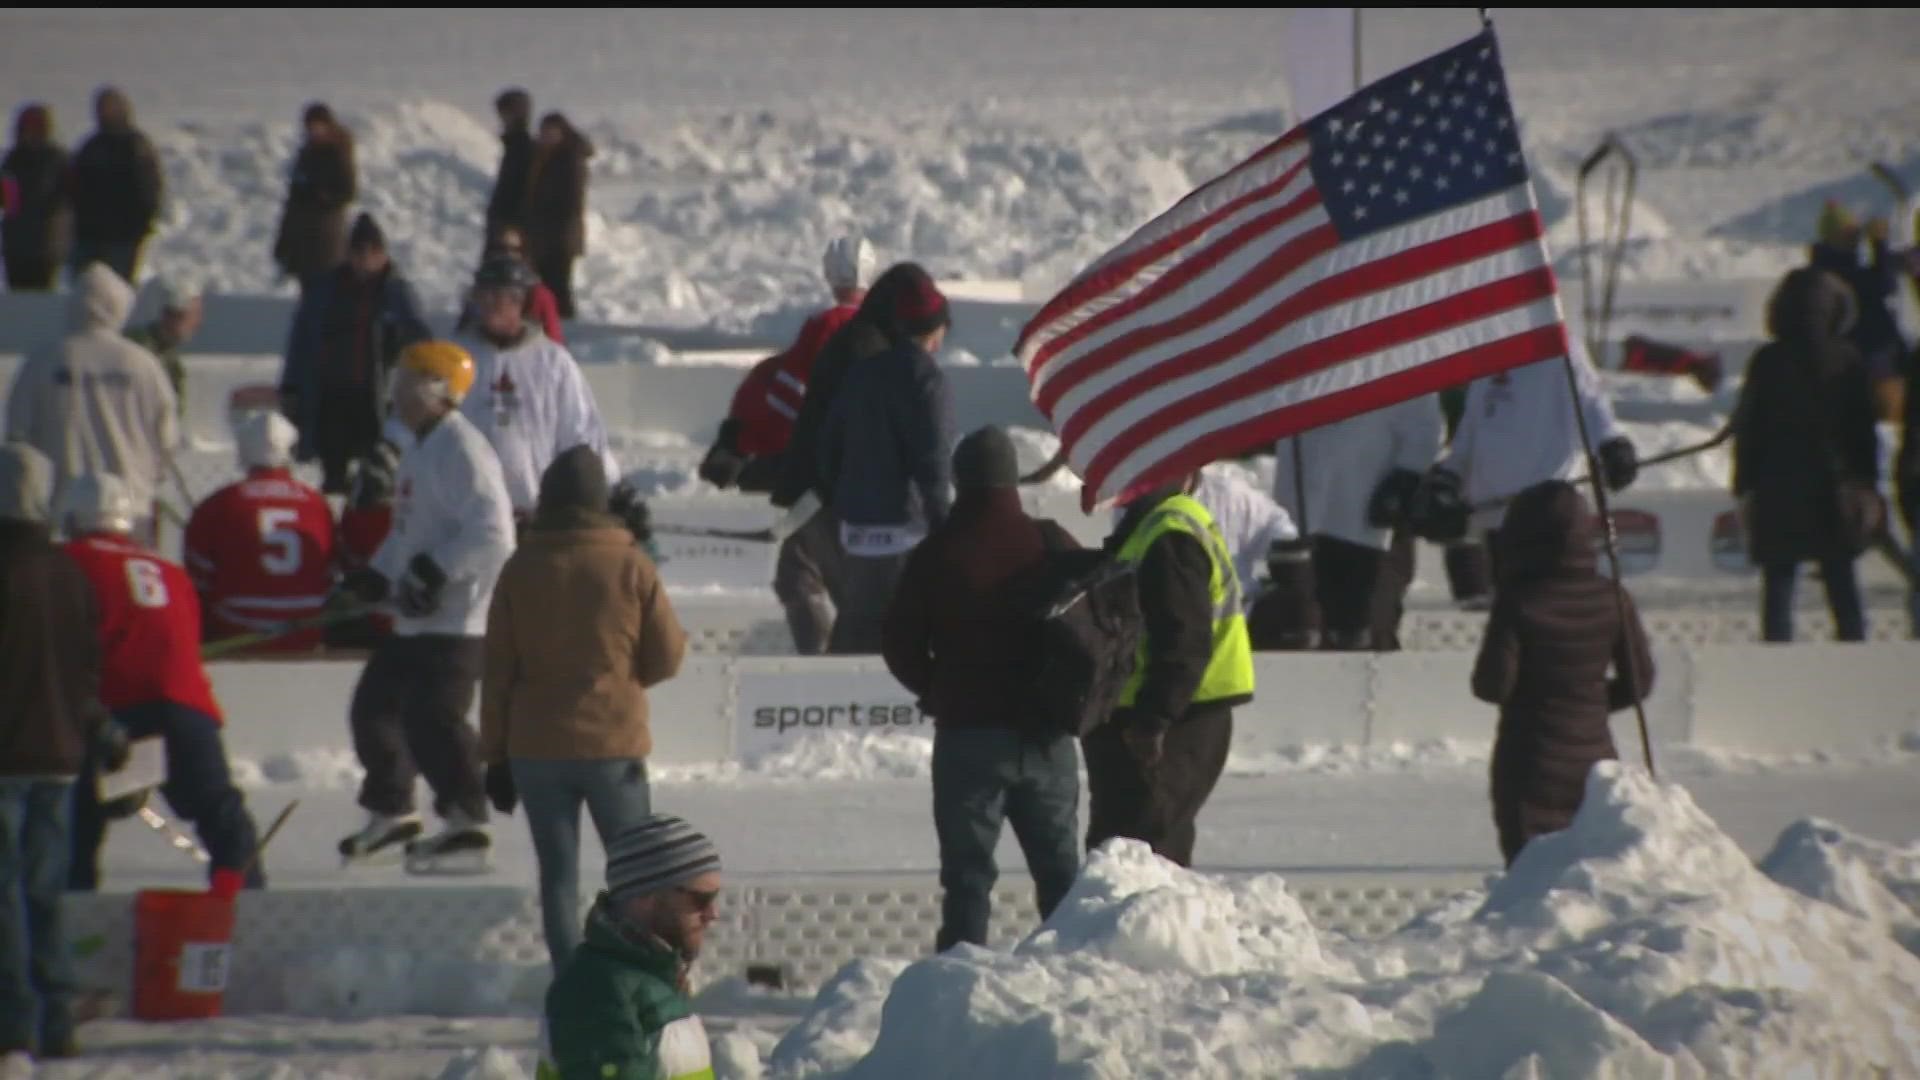 For almost two decades, Minnesota has hosted the U.S. Pond Hockey Championships in Minneapolis.